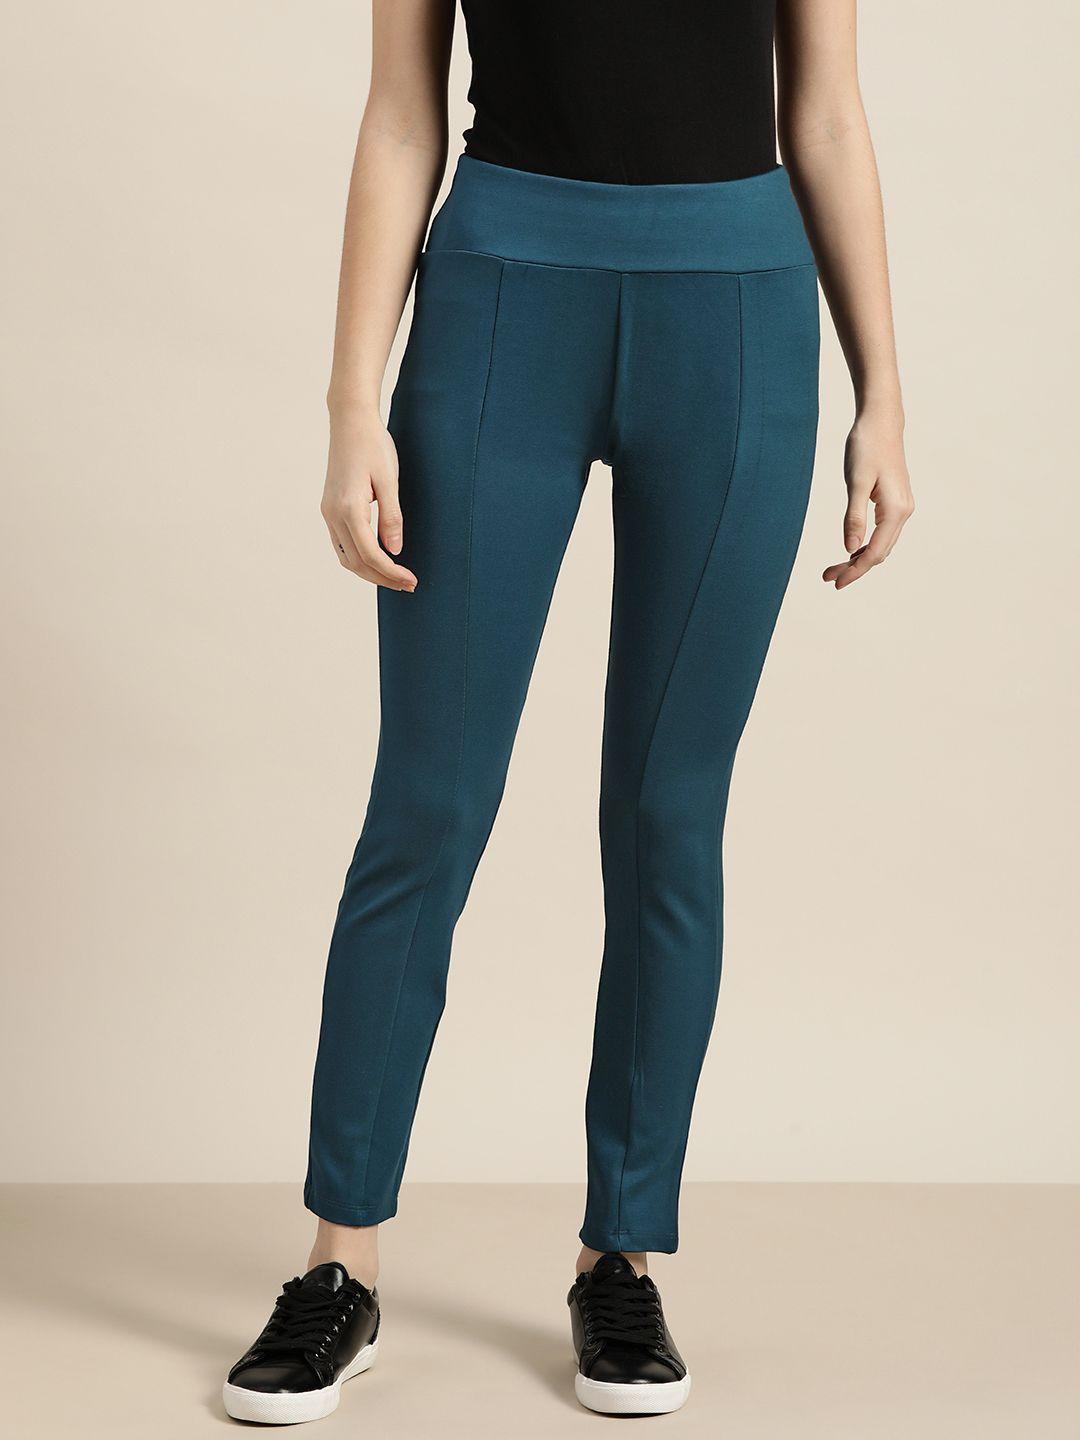 ether women teal blue solid treggings